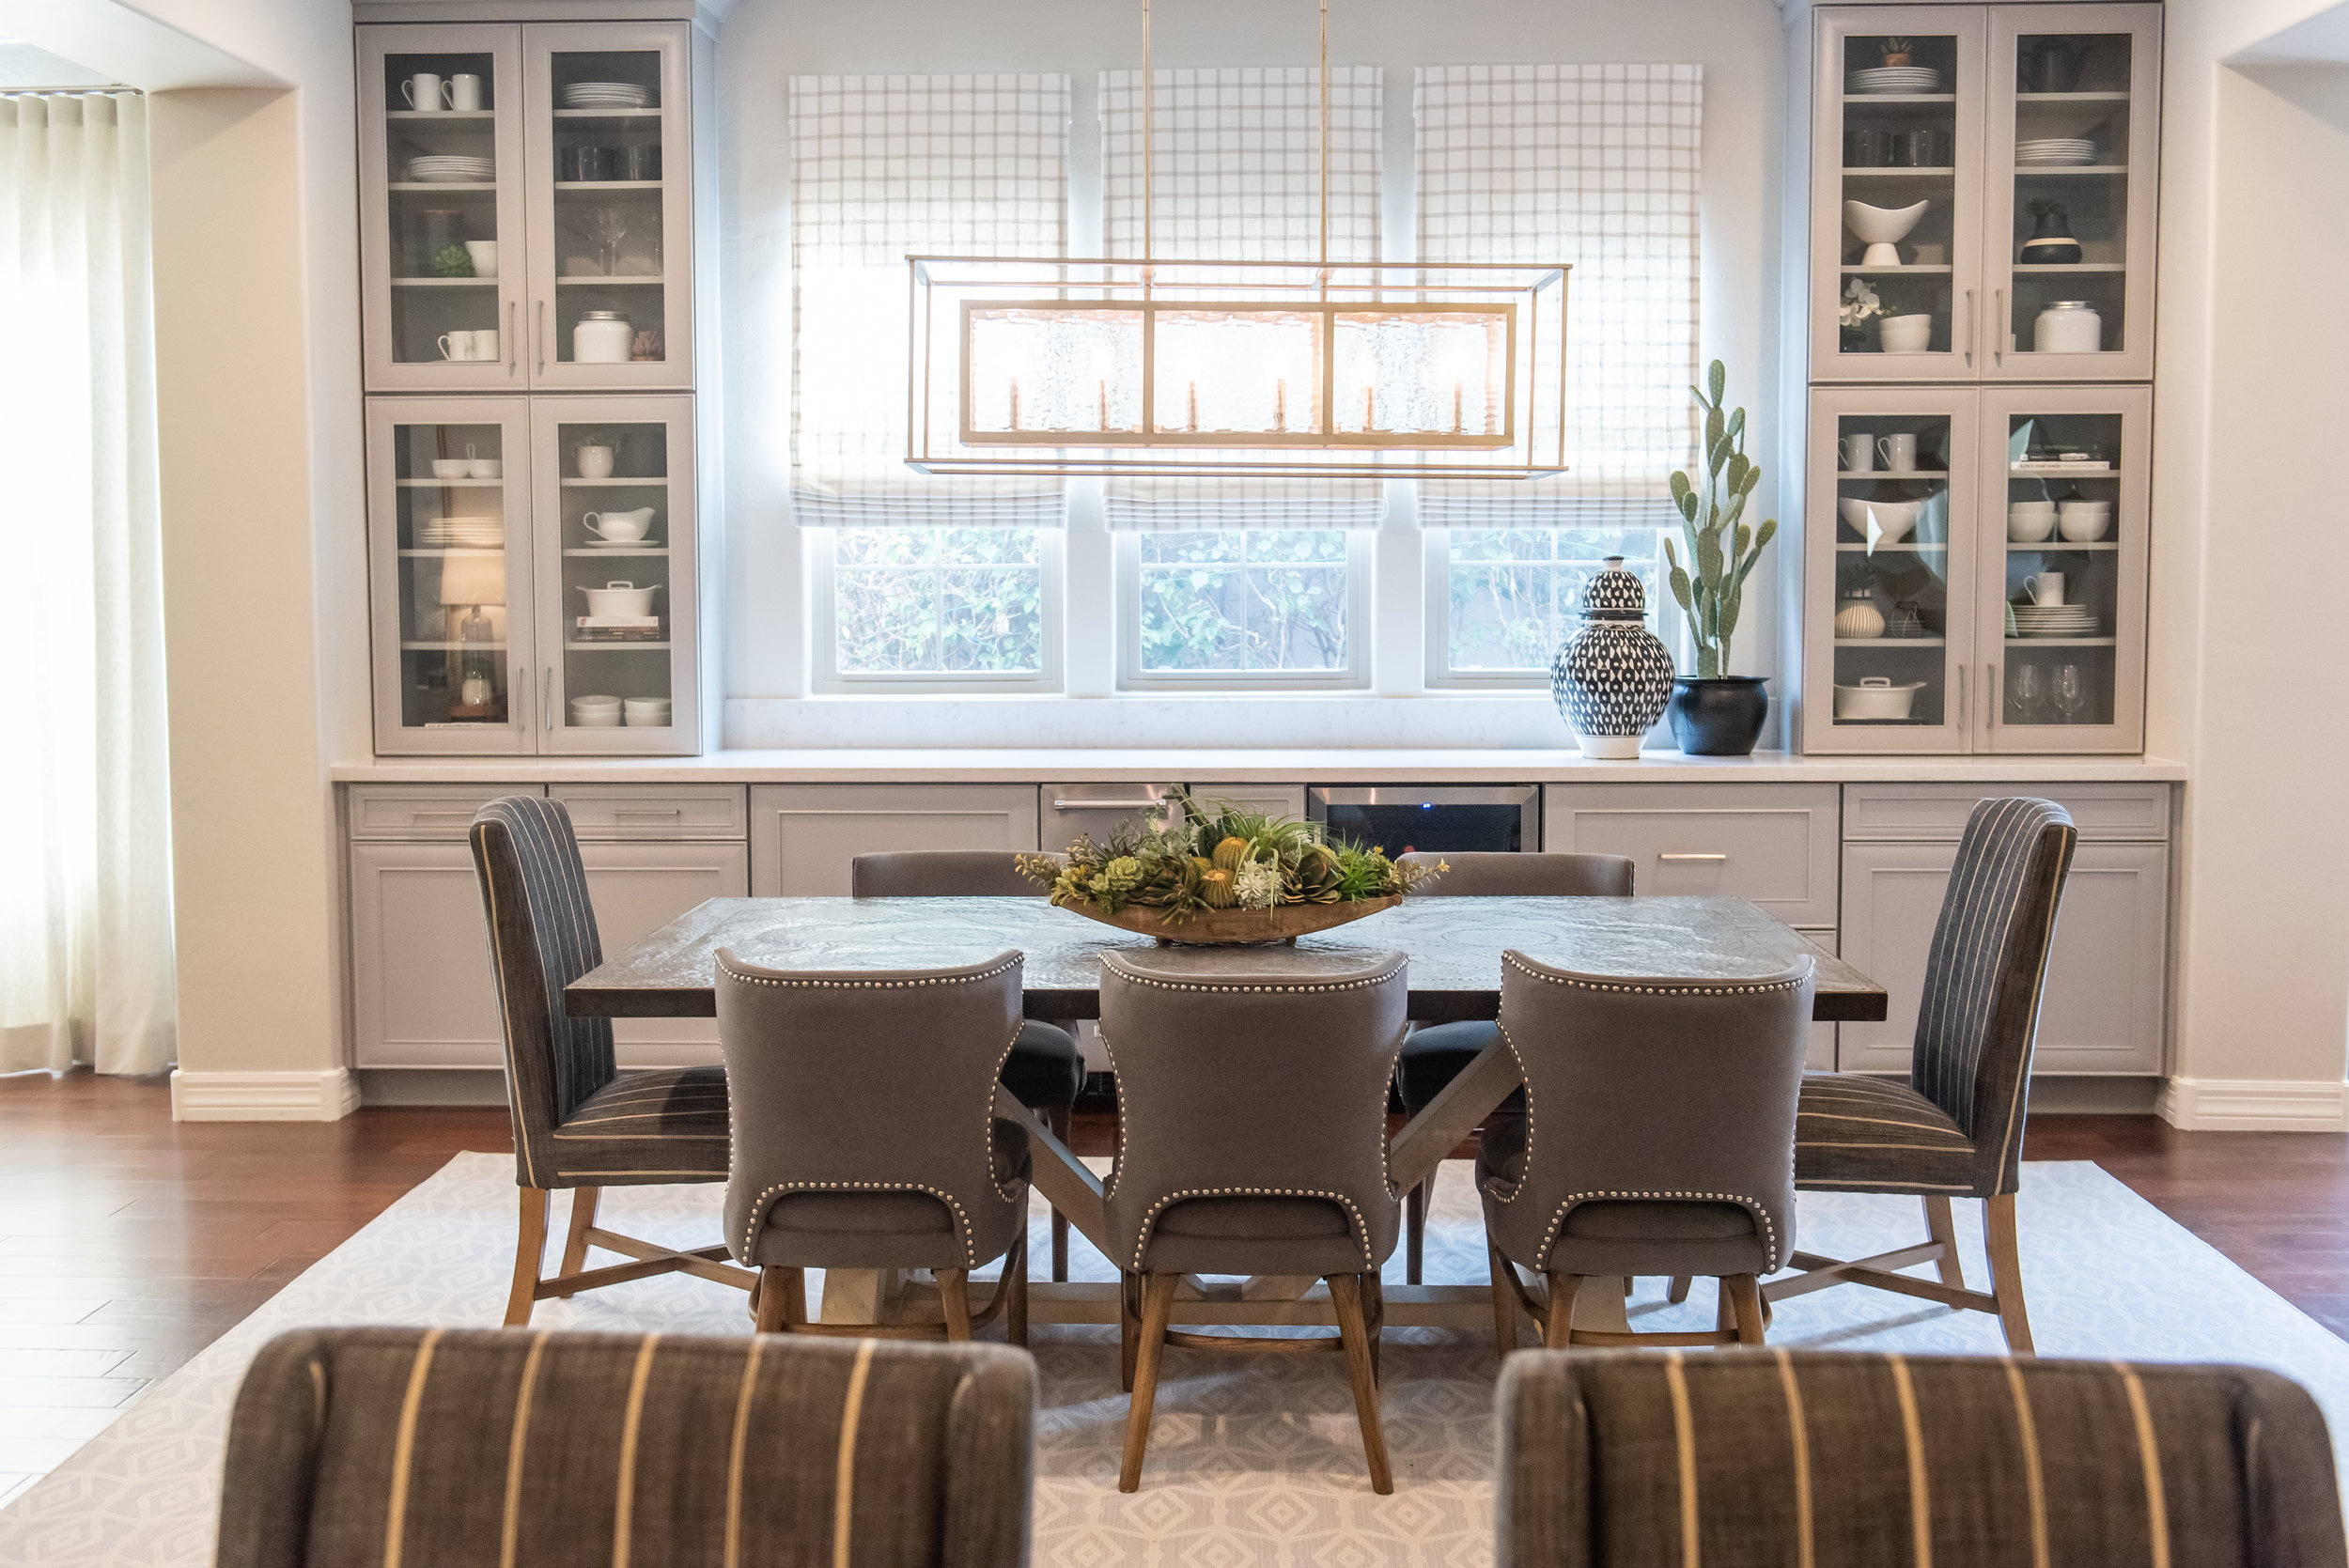 Diningroom + Built-in cabinets +chandelier +roman-shades +nailhead +dining-chairs.jpg